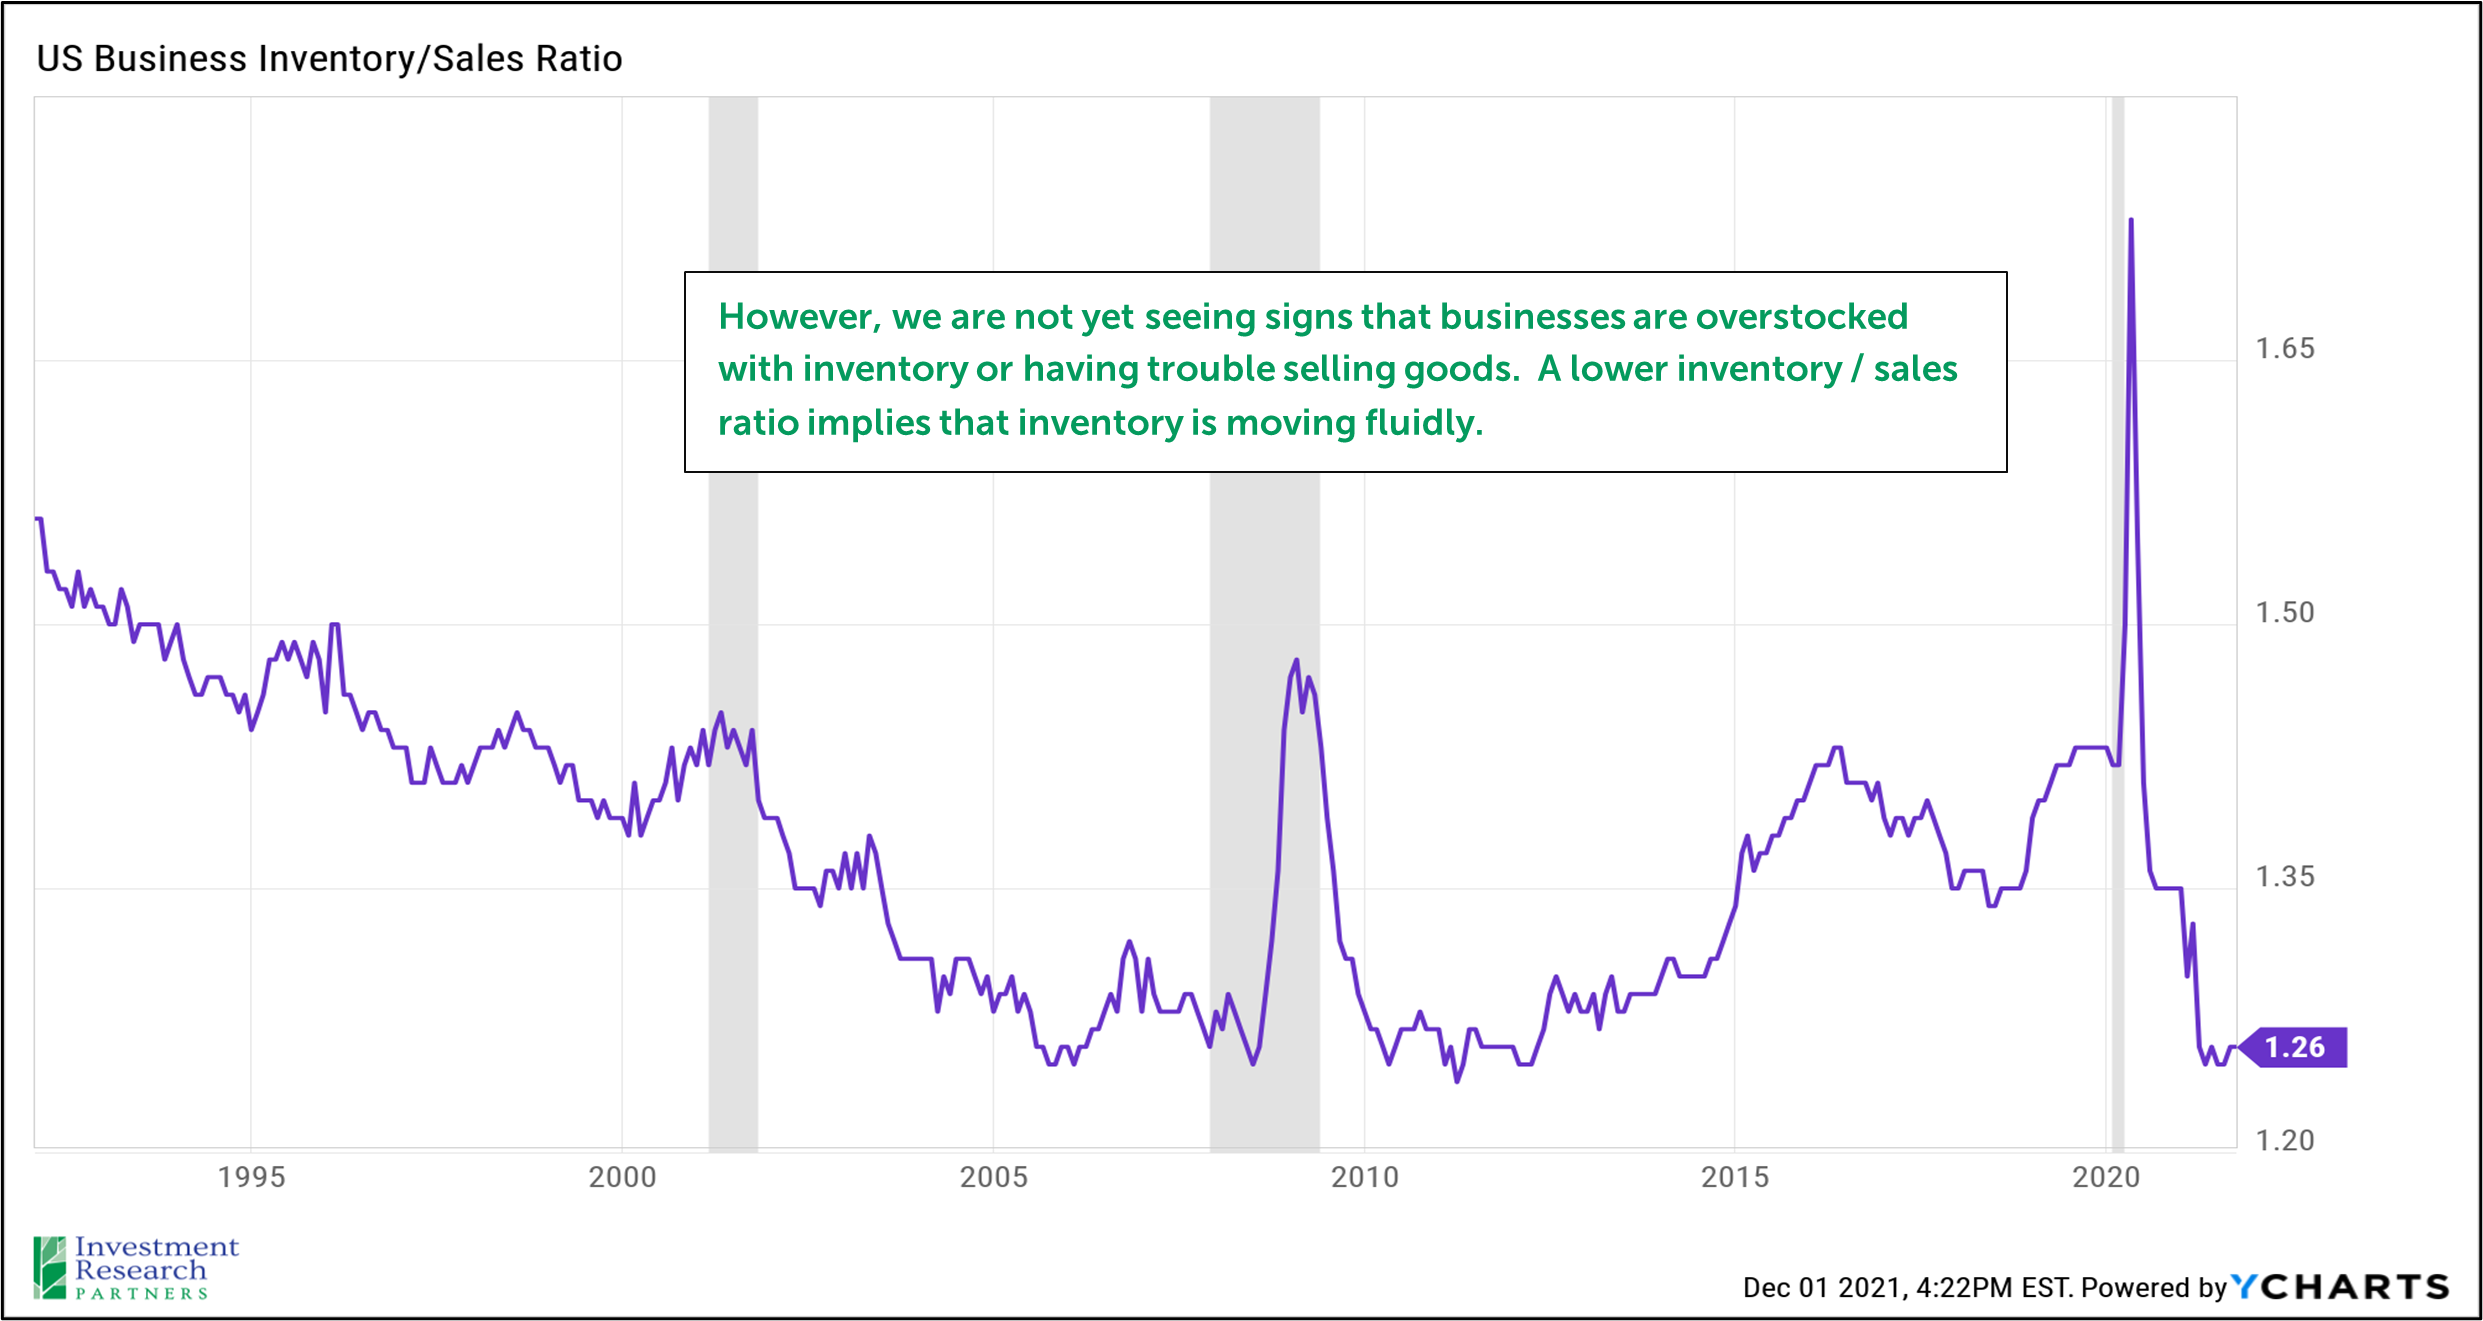 Line graph depicting US Business Inventory/Sales Ratio from 1995 to 2021 with text that reads: However, we are not yet seeing signs that businesses are overstocked with inventory or having trouble selling goods. A lower inventory / sales ratio implies that inventory is moving fluidly.